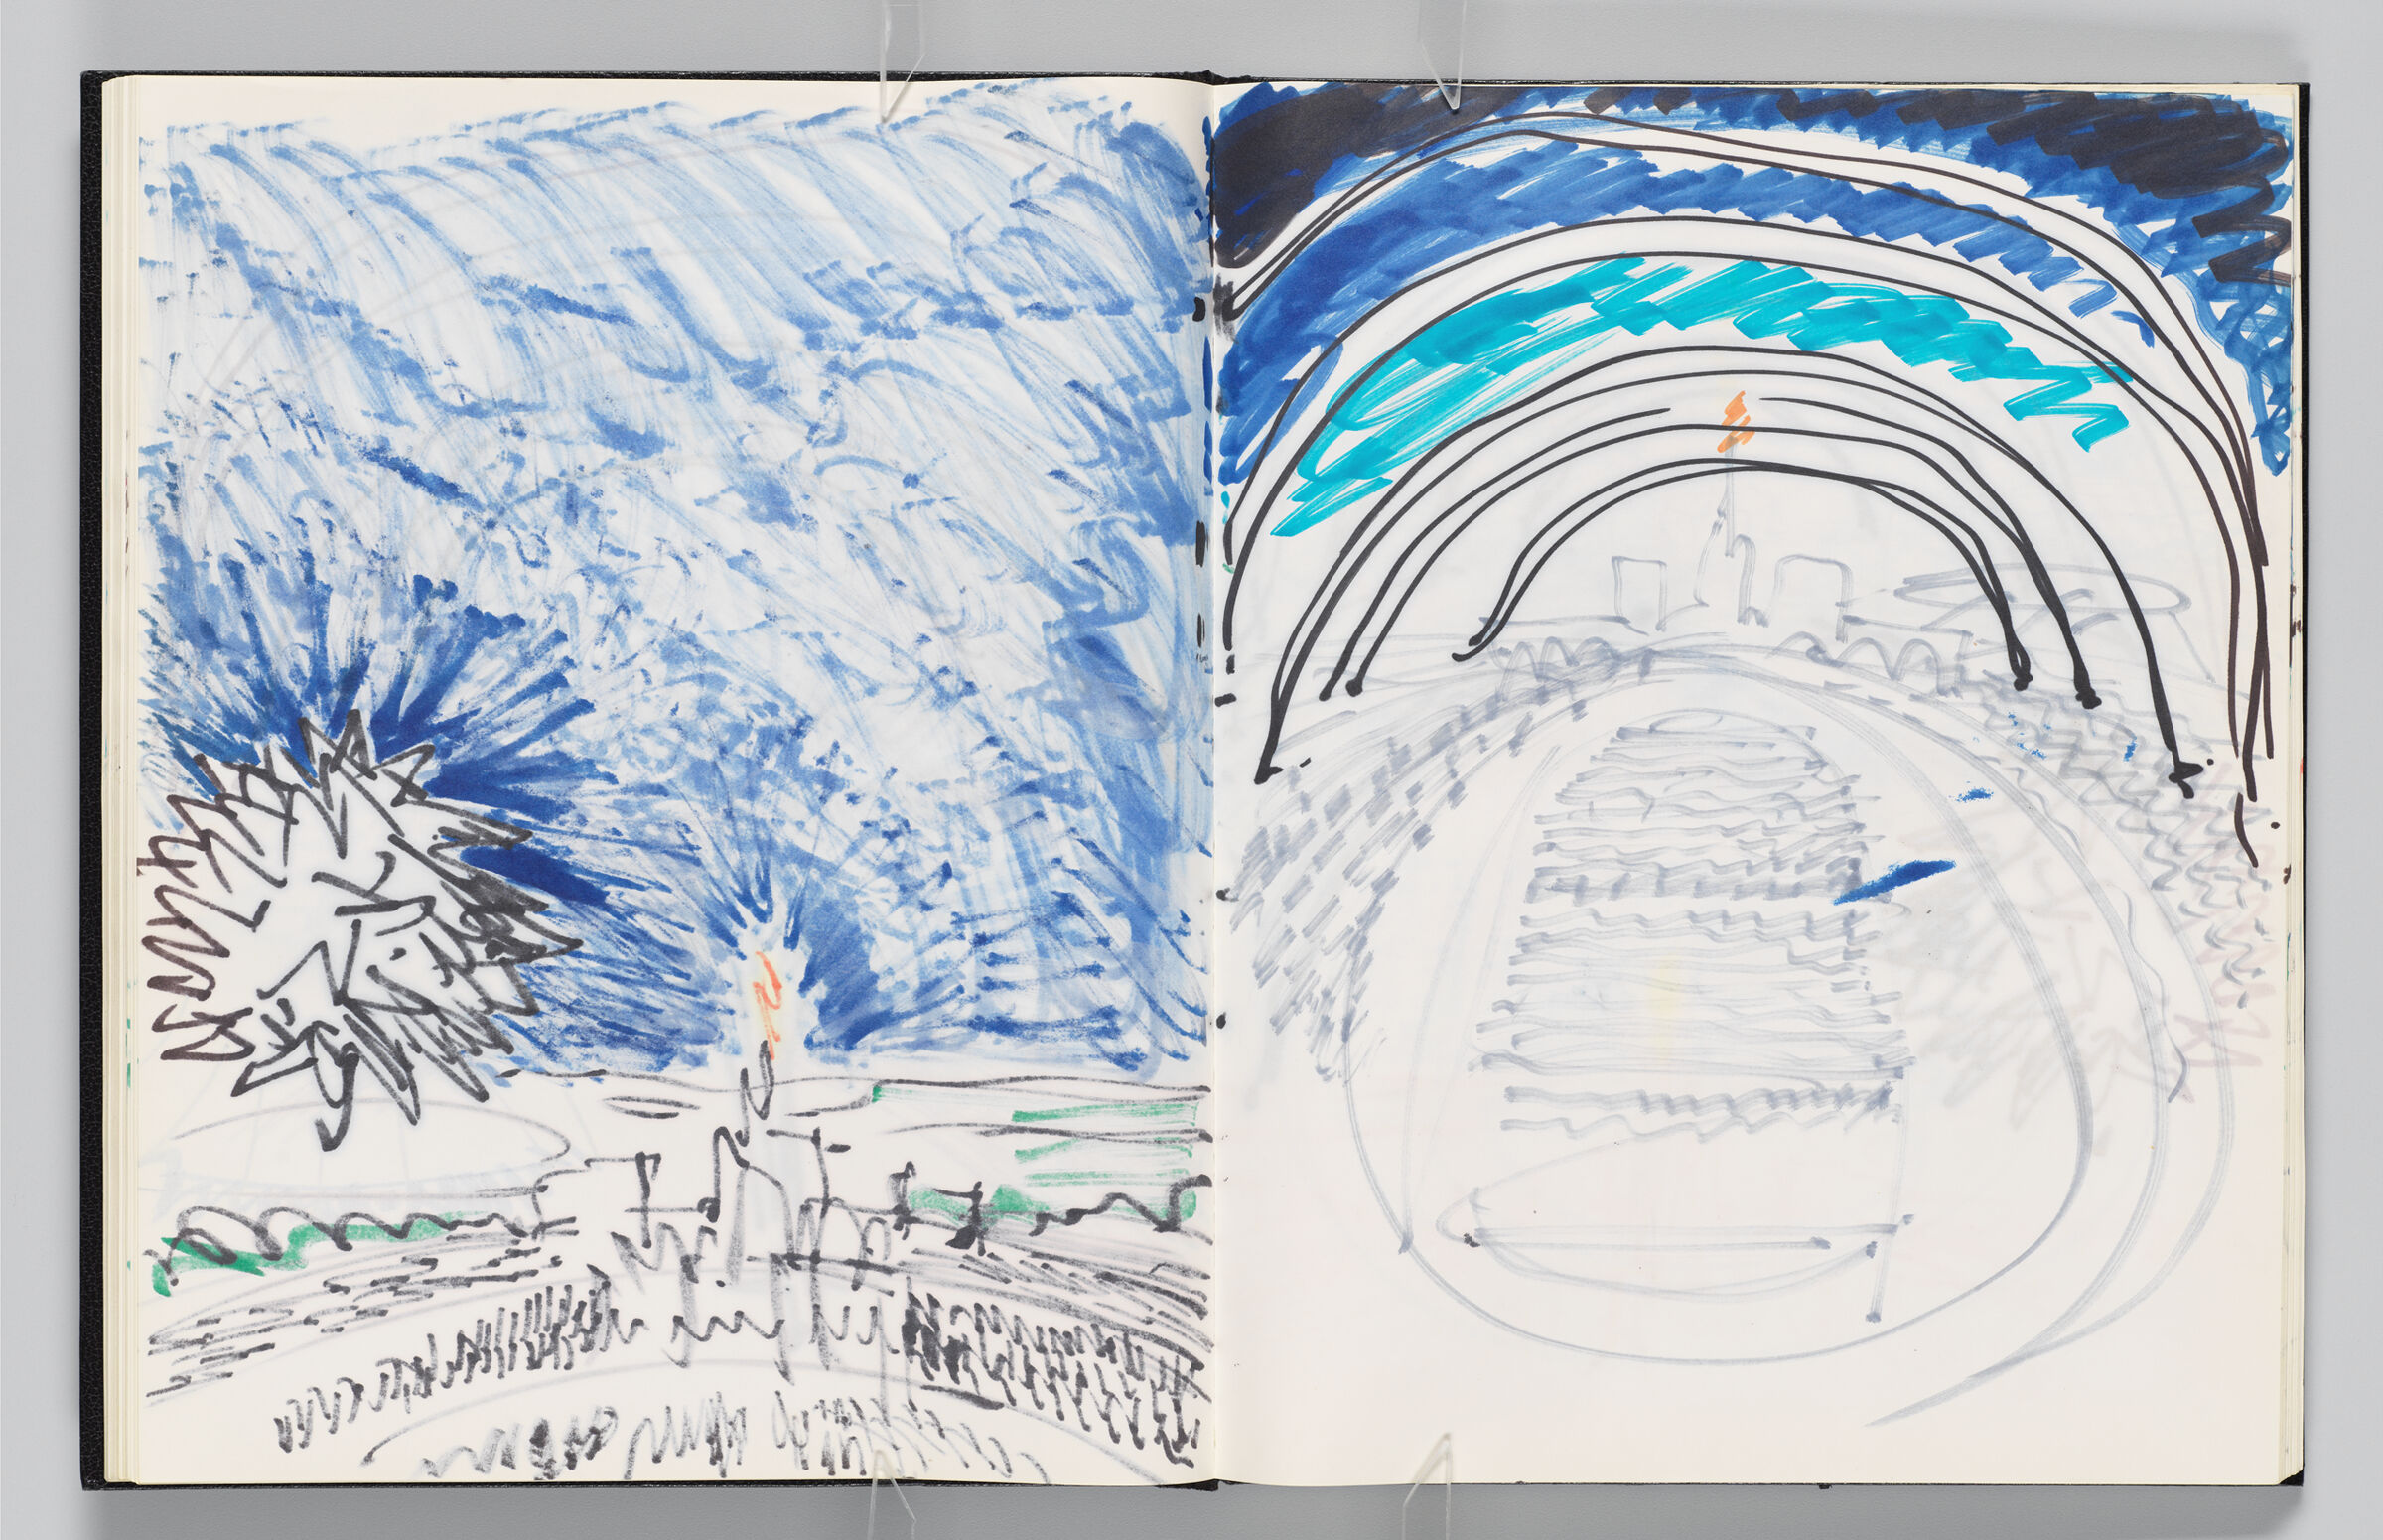 Untitled (Bleed-Through Of Previous Page, Left Page); Untitled (Rainbows Over Track, Right Page)